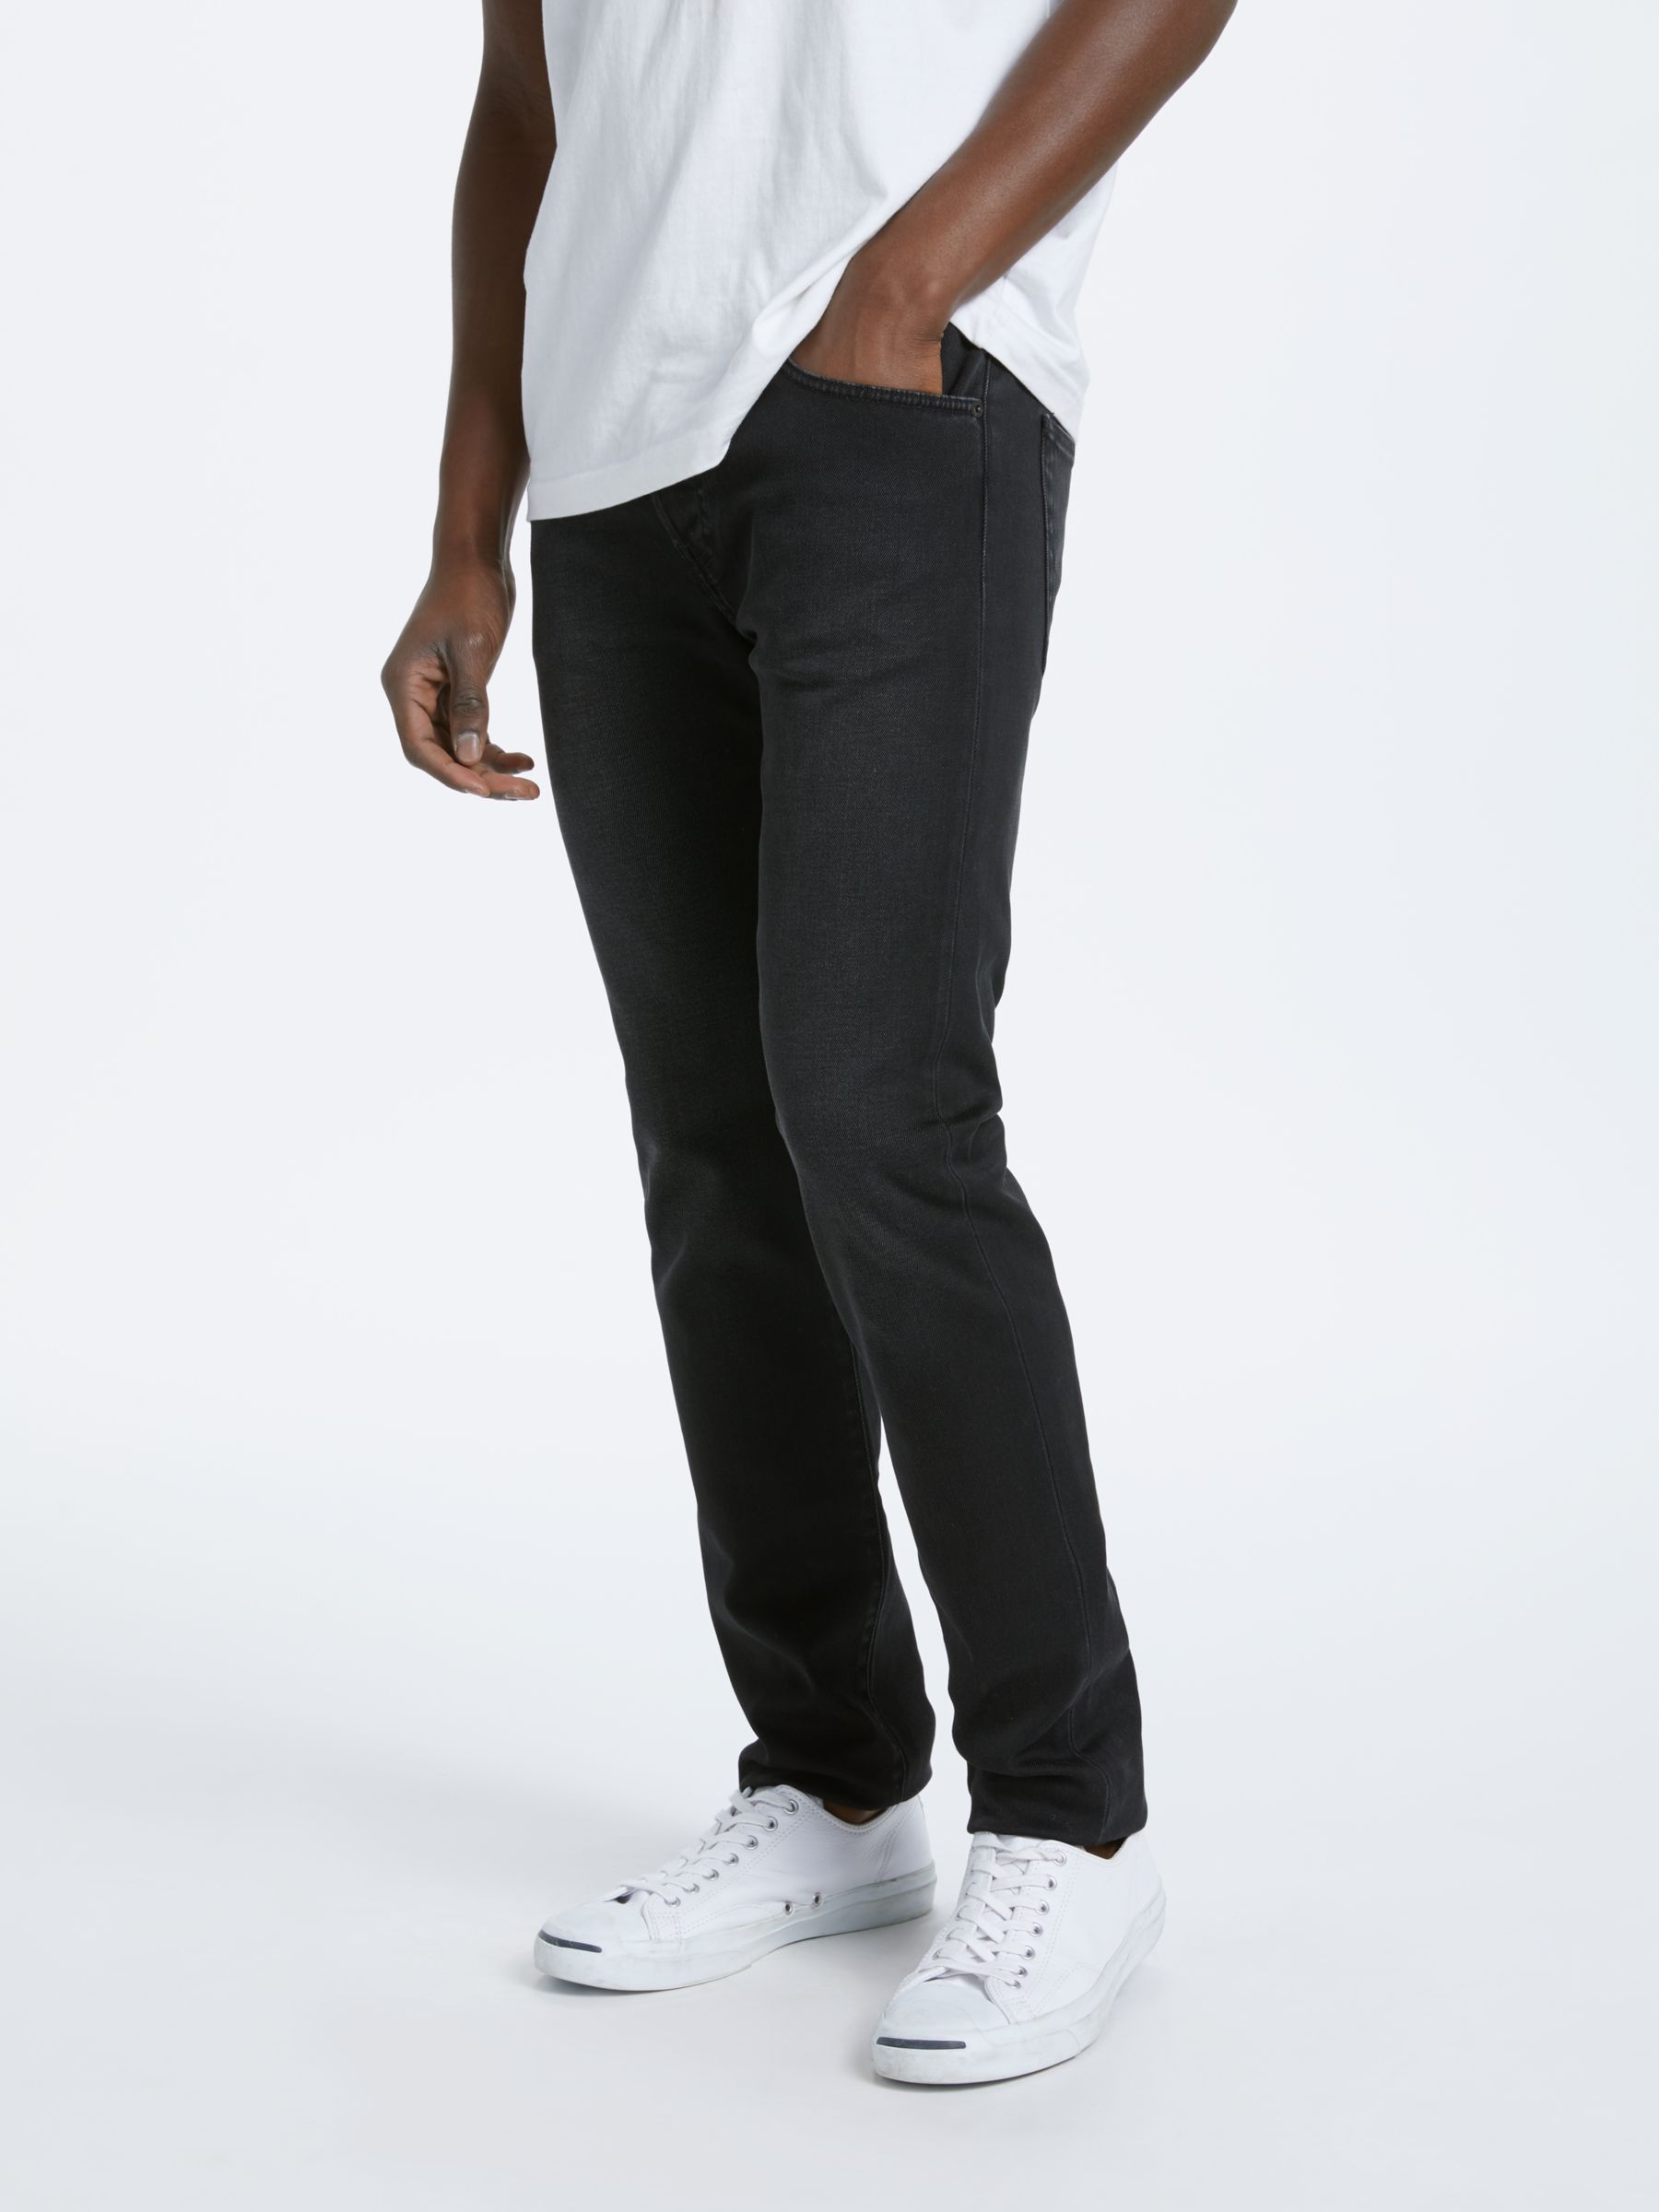 edwin ed 80 slim tapered jeans